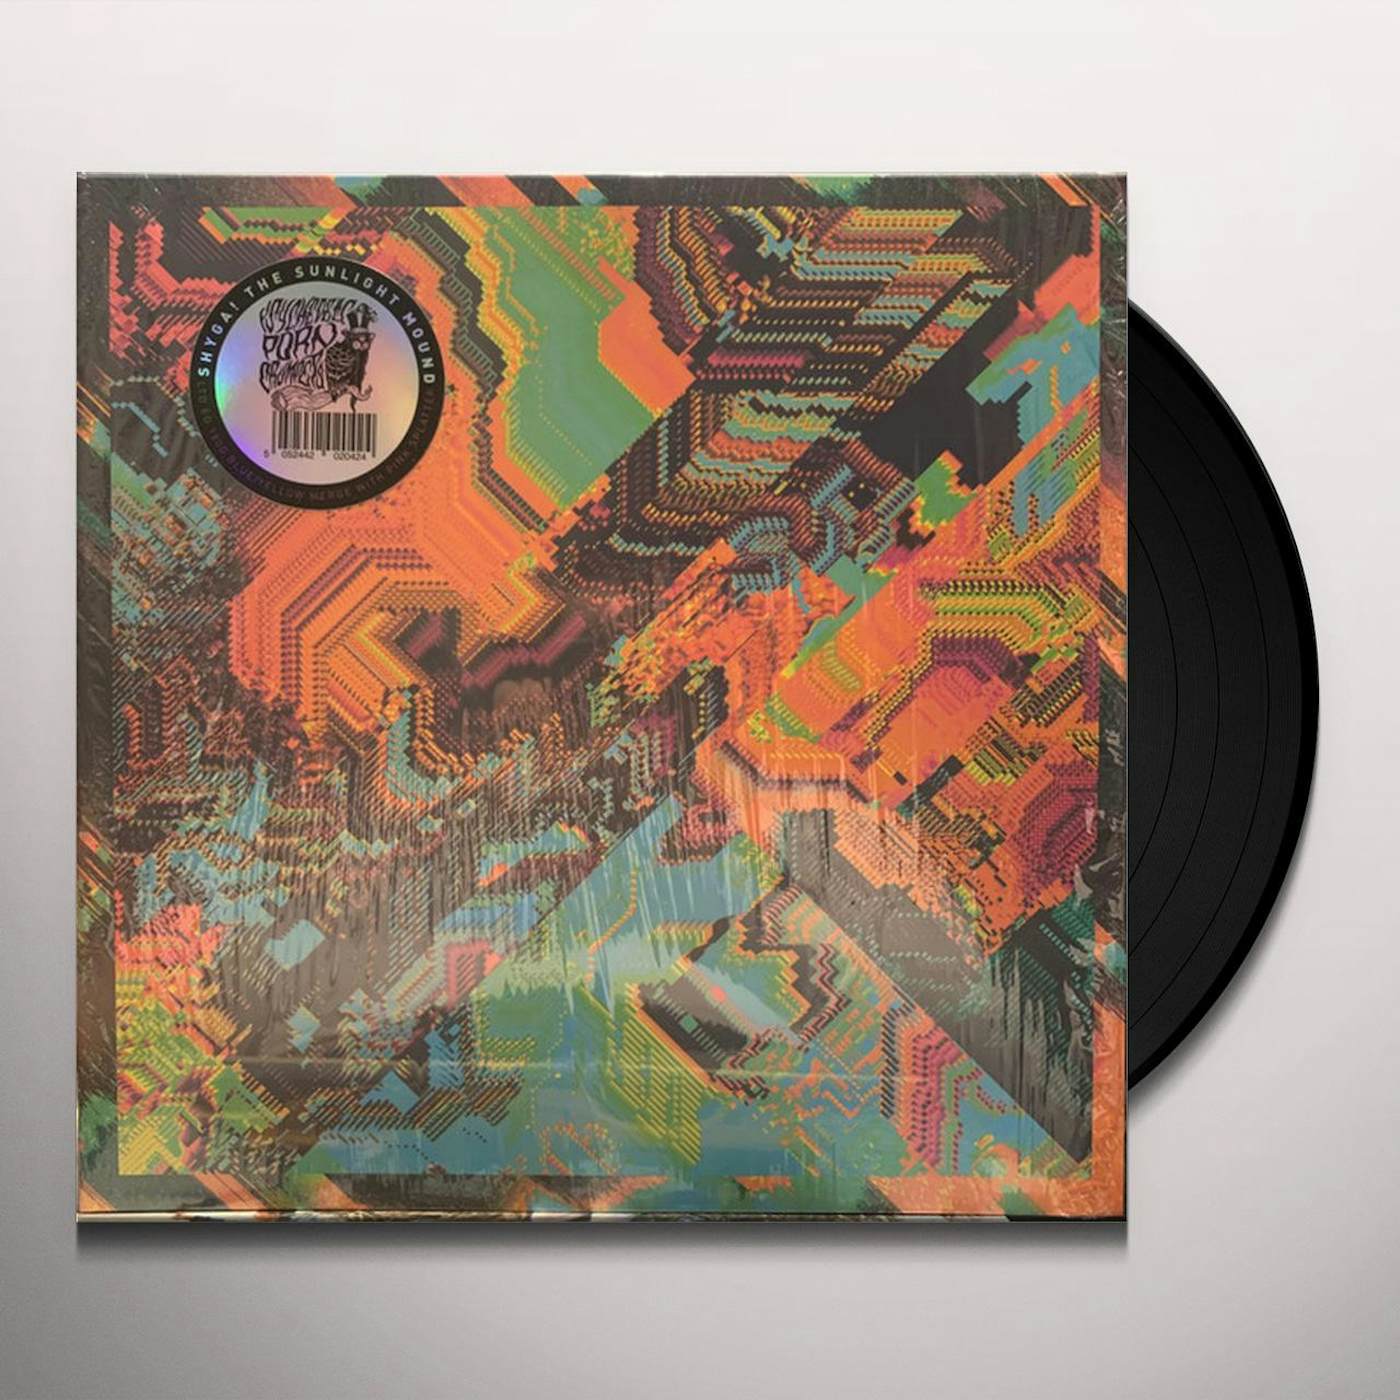 Psychedelic Porn Crumpets SHYGA THE SUNLIGHT MOUND Vinyl Record